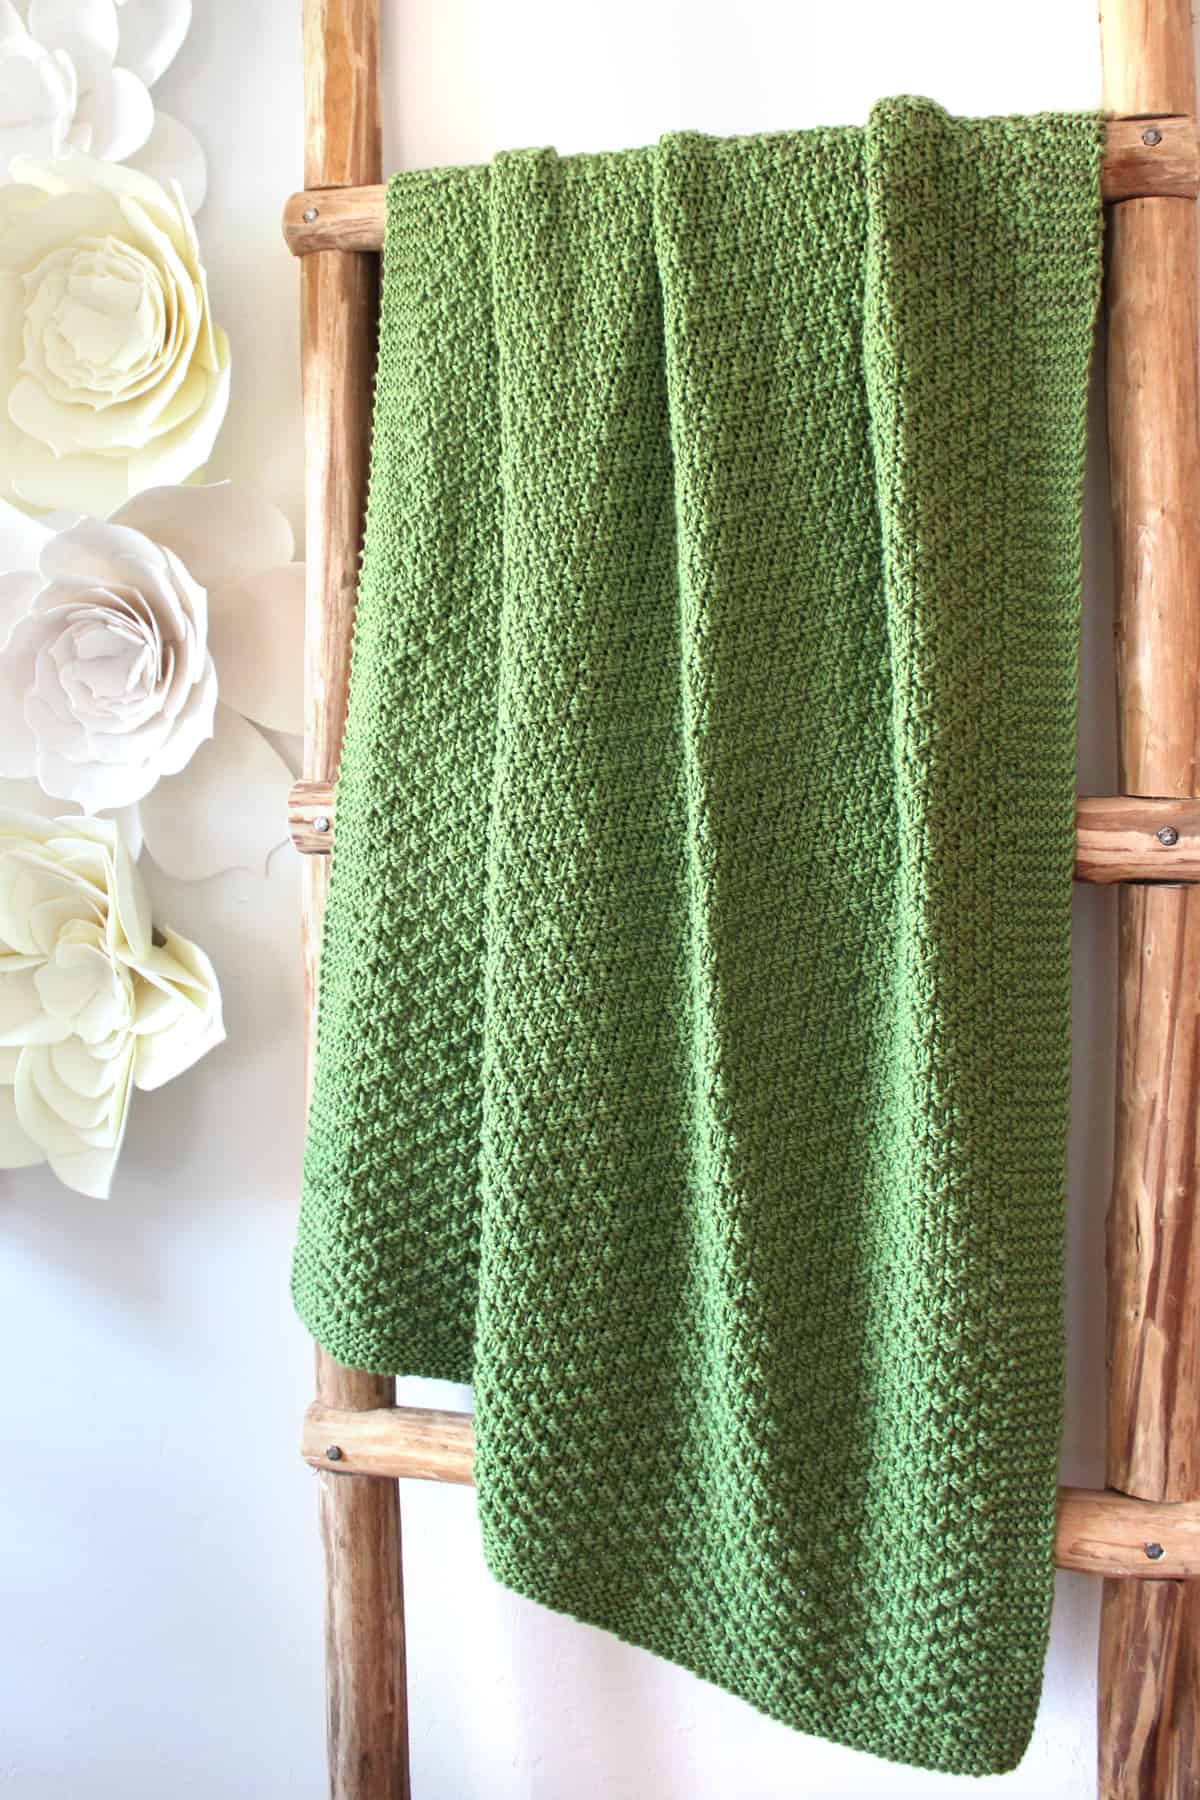 Knitted Double Moss Stitch draped on Blanket Ladder in green yarn color with felt flowers on wall.